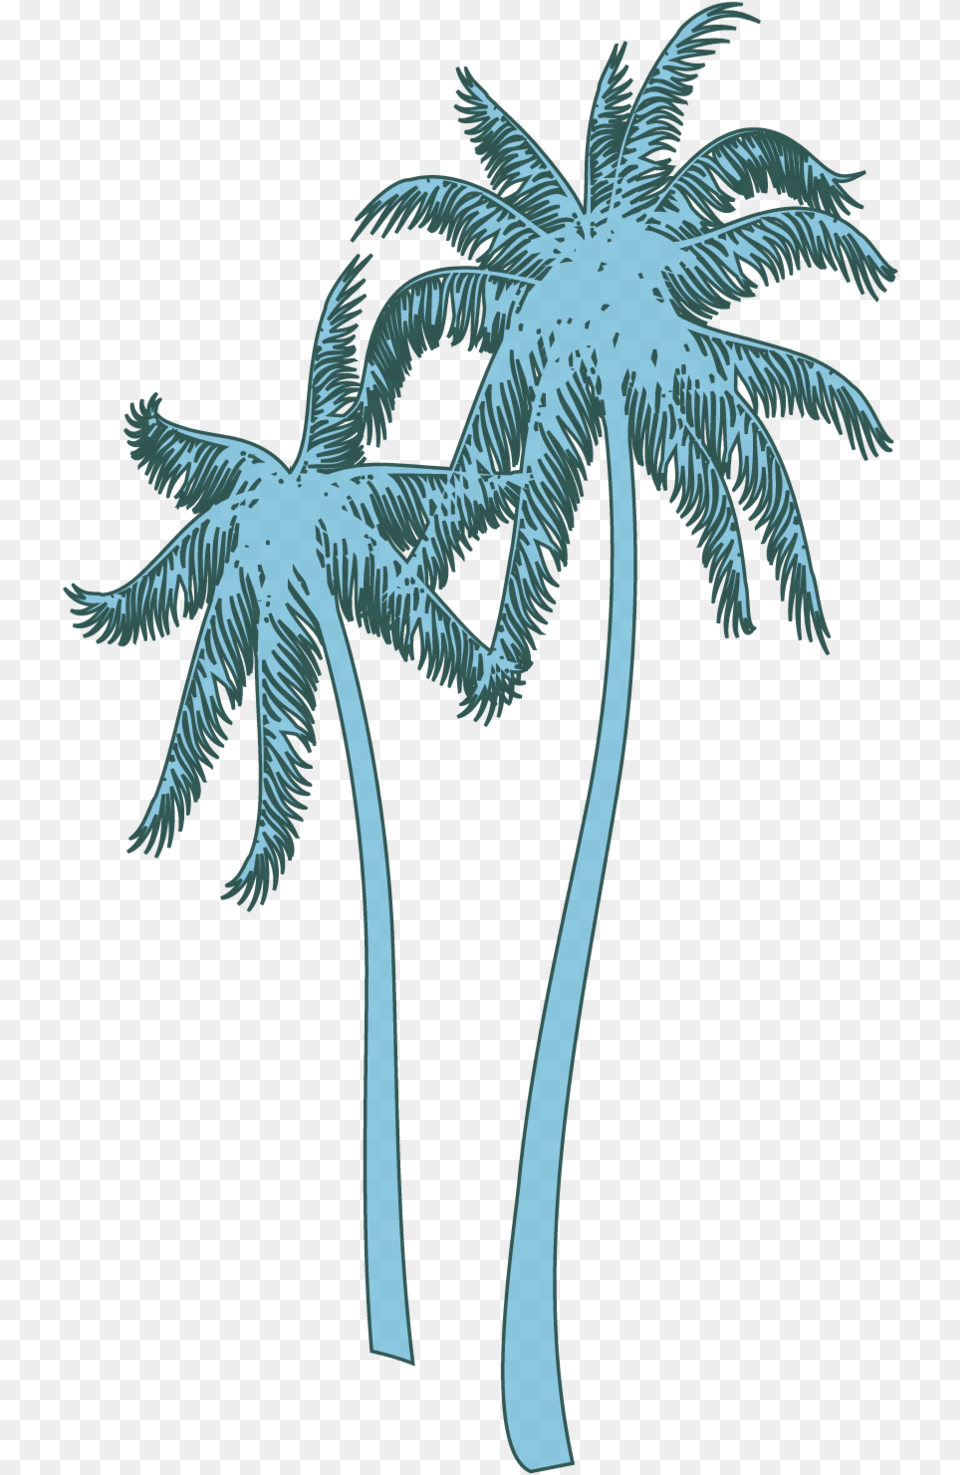 Download Coconut Tree Image With No Roystonea, Palm Tree, Plant, Animal, Bird Png